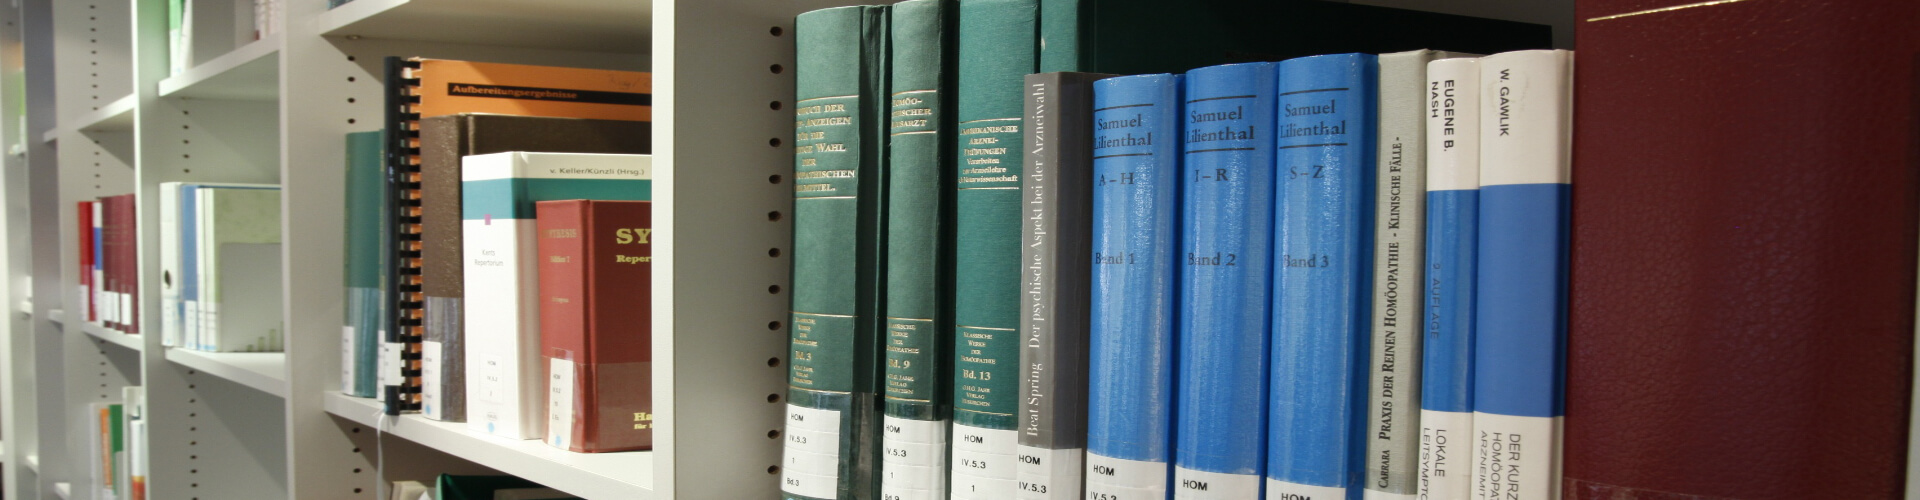 Non-fiction and textbooks in a university library that has received a non-fiction book translation